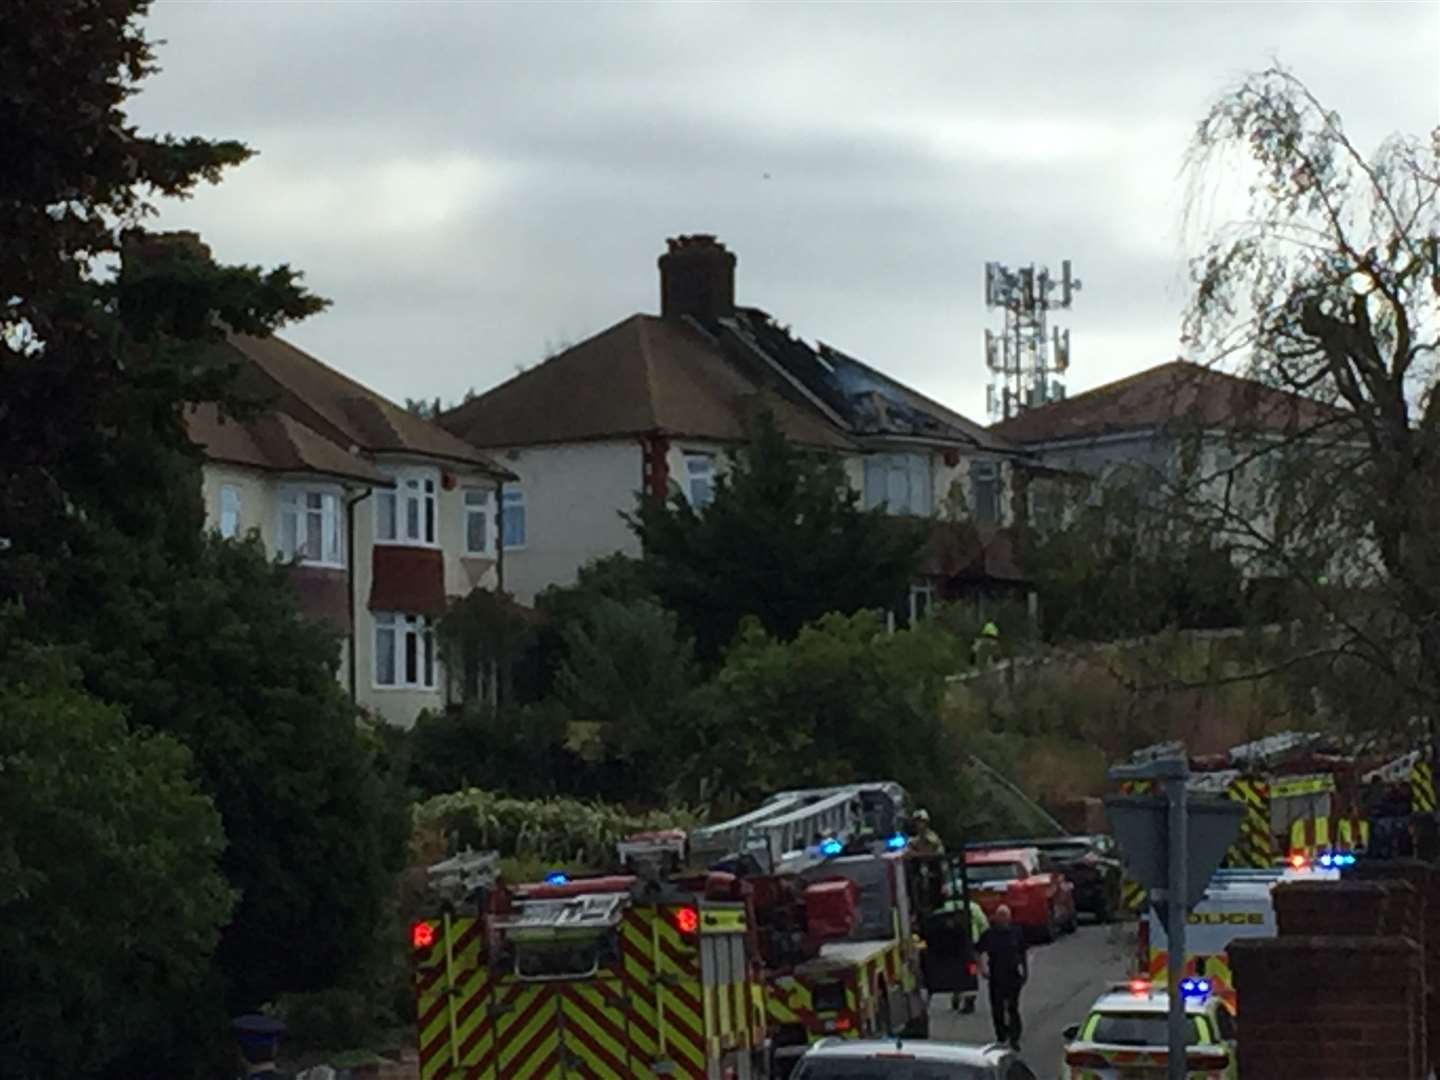 Firefighters and police at the scene of the fire in Broom Hill Road, Strood. Pictures: Brad Harper